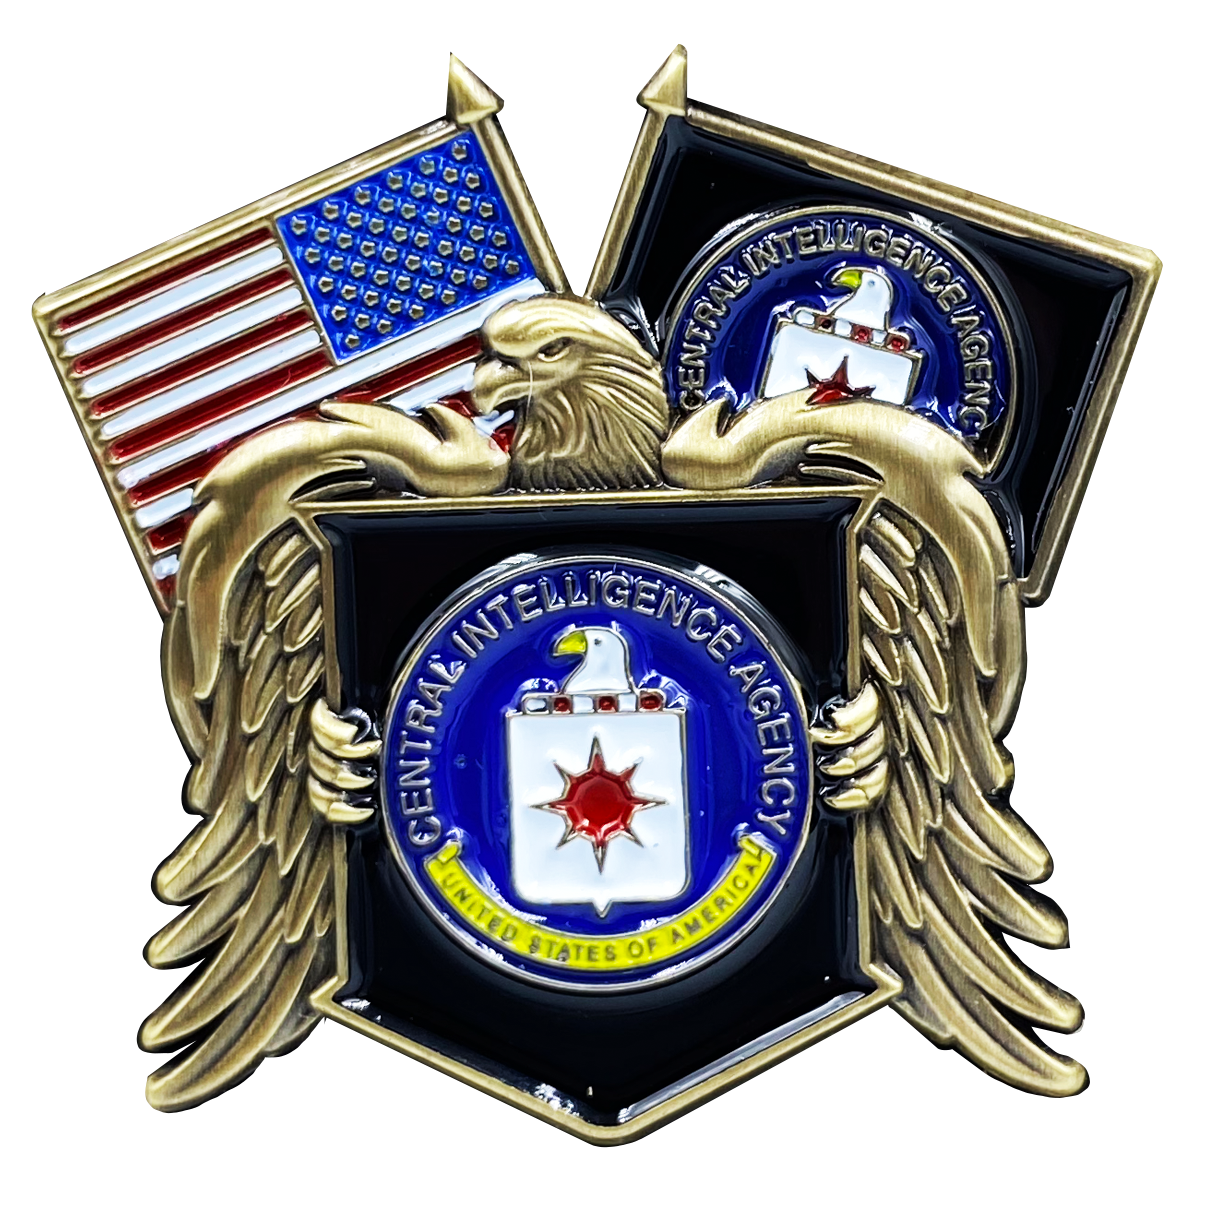 BL18-006 CIA Central Intelligence Agency Lapel Pin with 3D eagle